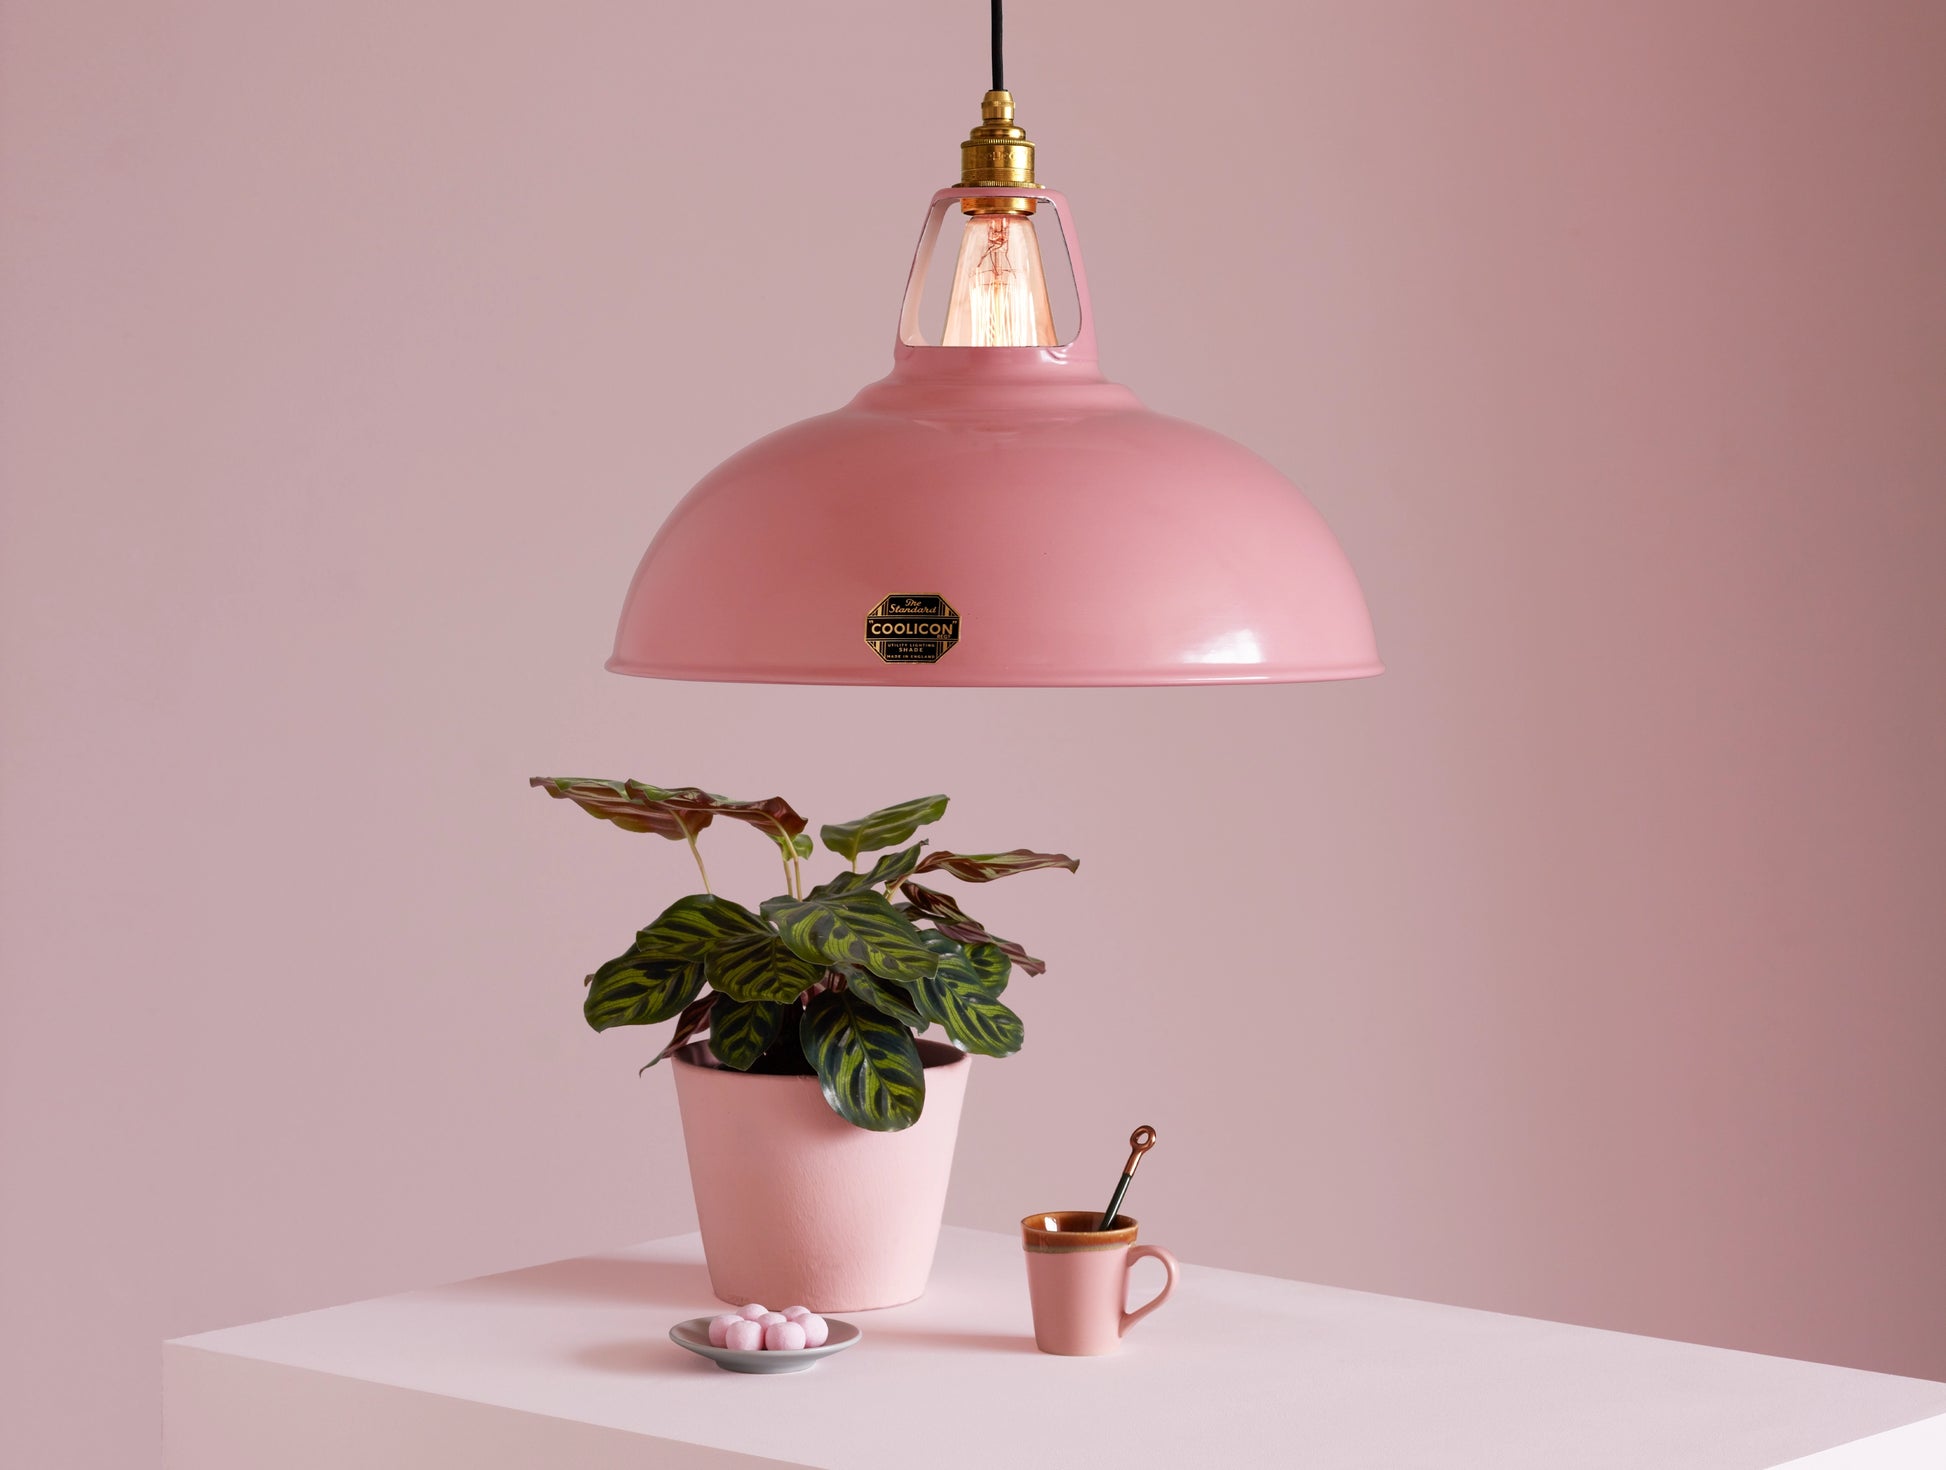 A Large Coolicon Powder Pink lampshade with a Porcelain pendant set hanging above a plinth with a pinstripe calathea plant in a pink plant pot, a pink mug with a copper spoon and a plate with pink bonbons